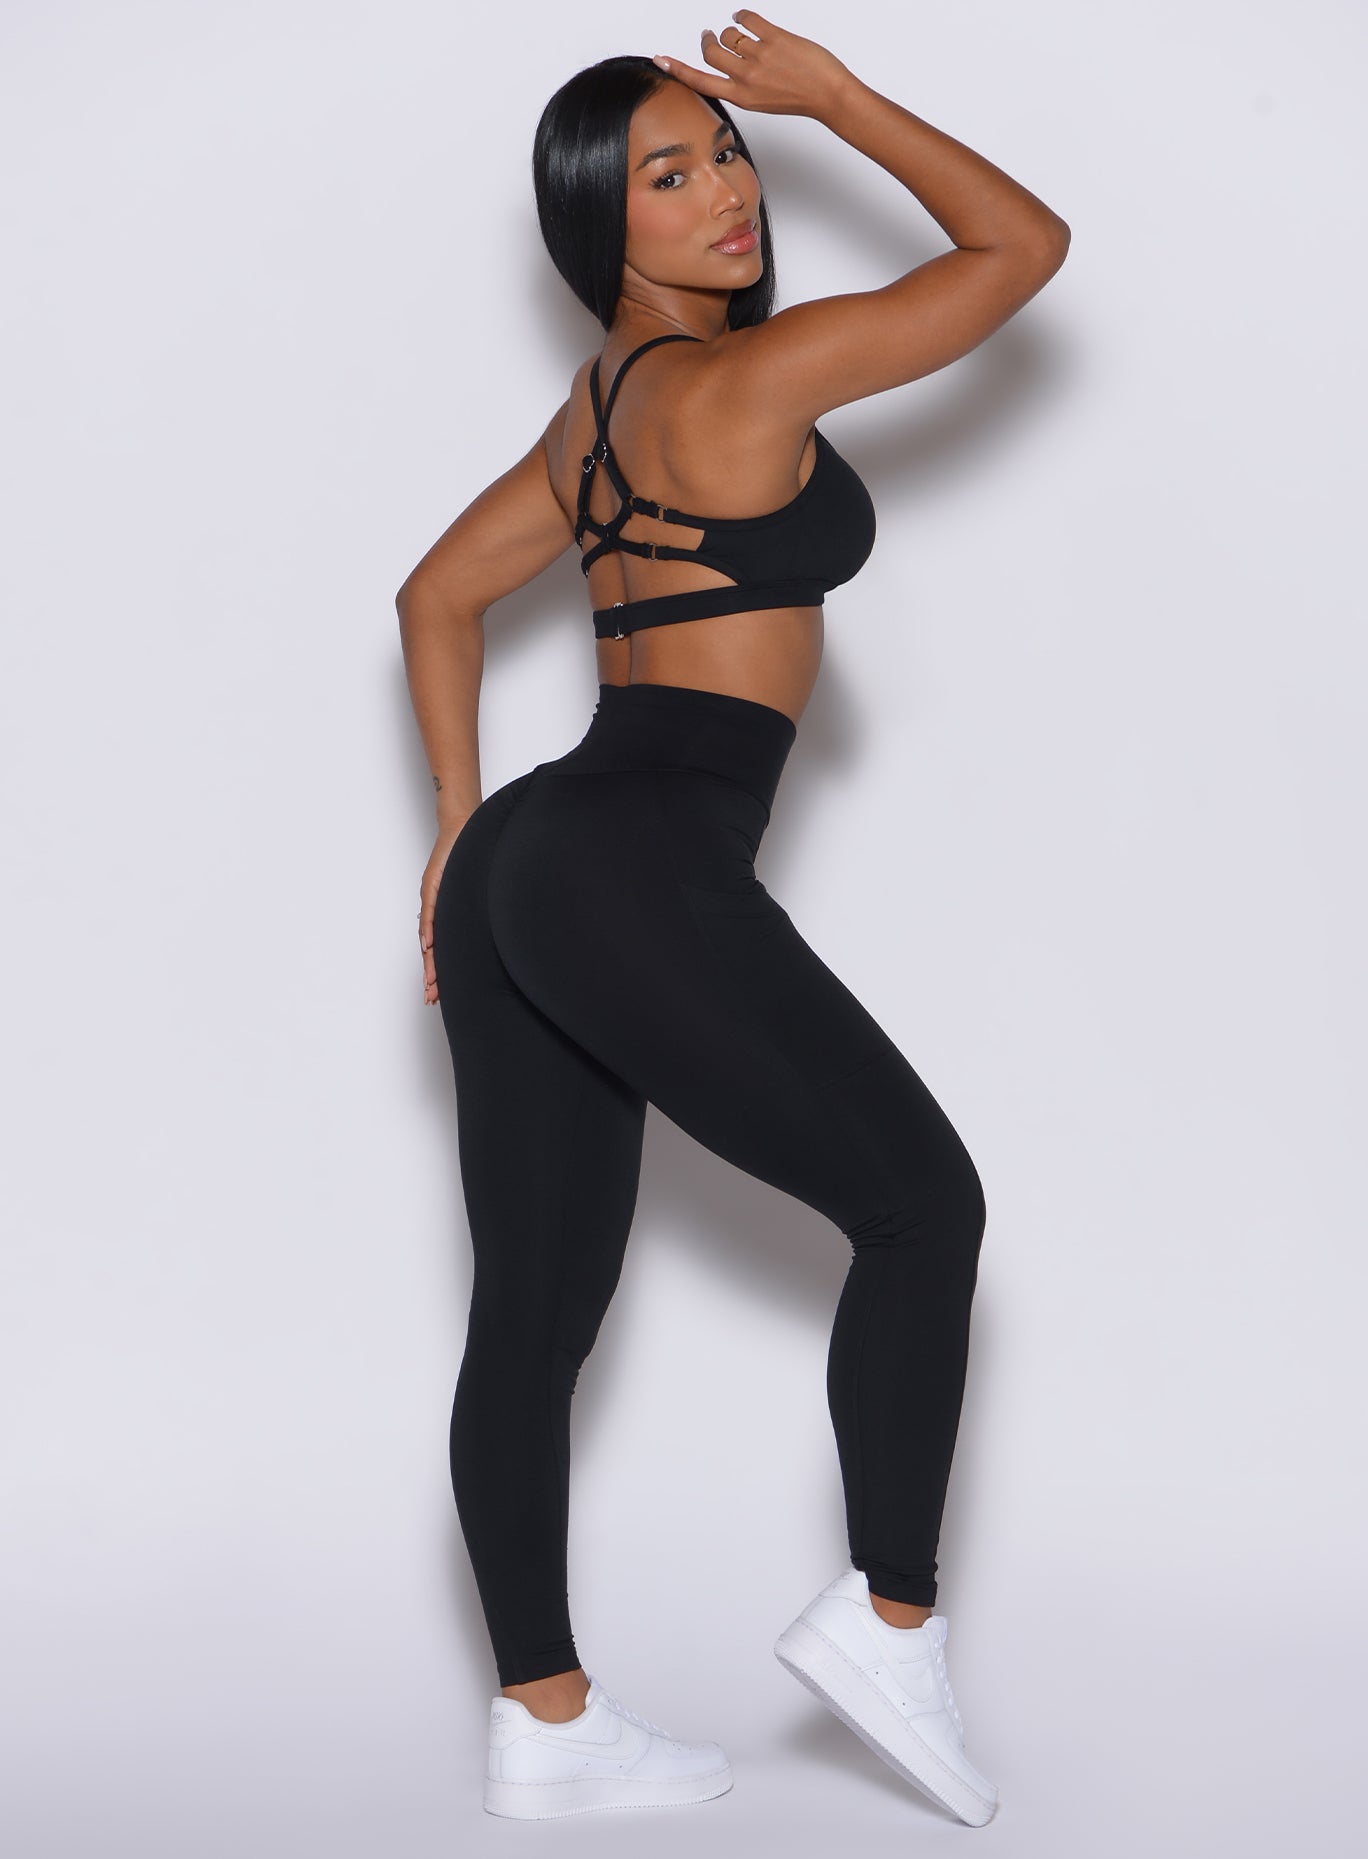 Right side profile view of a model wearing our black peach pocket leggings along with a matching bra